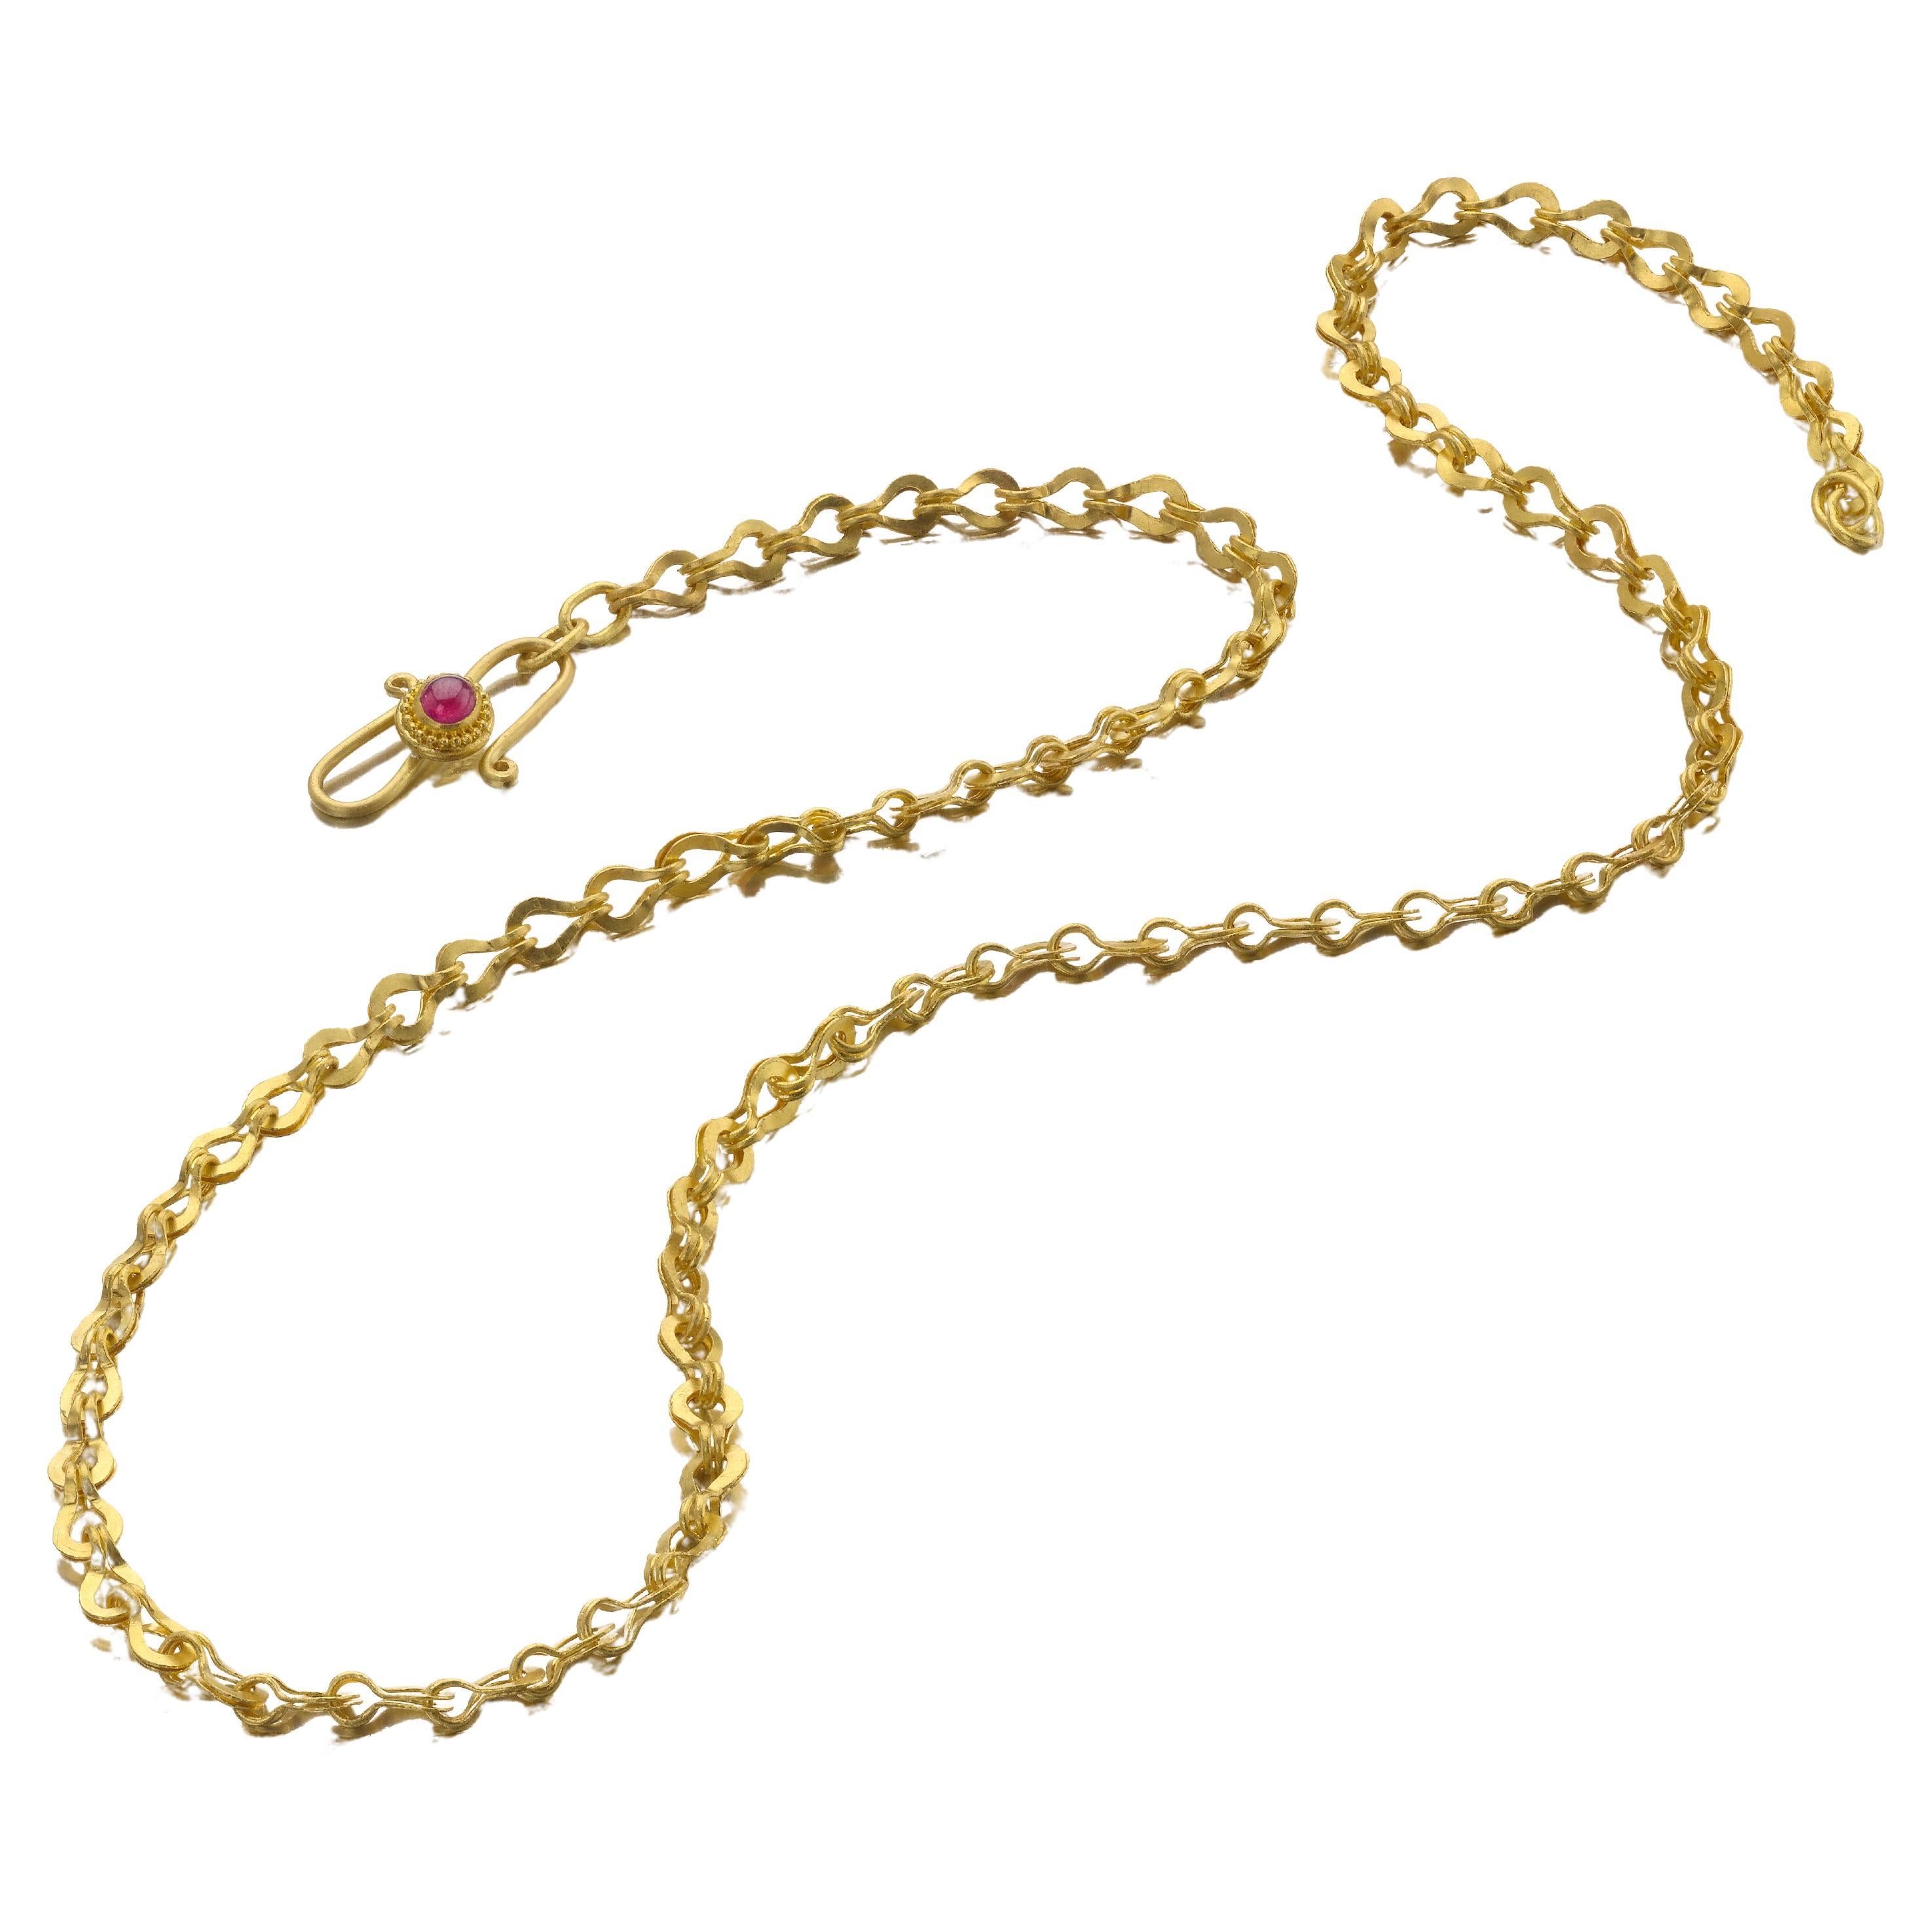 22 Karat Gold Planished Chain with Ruby Clasp For Sale